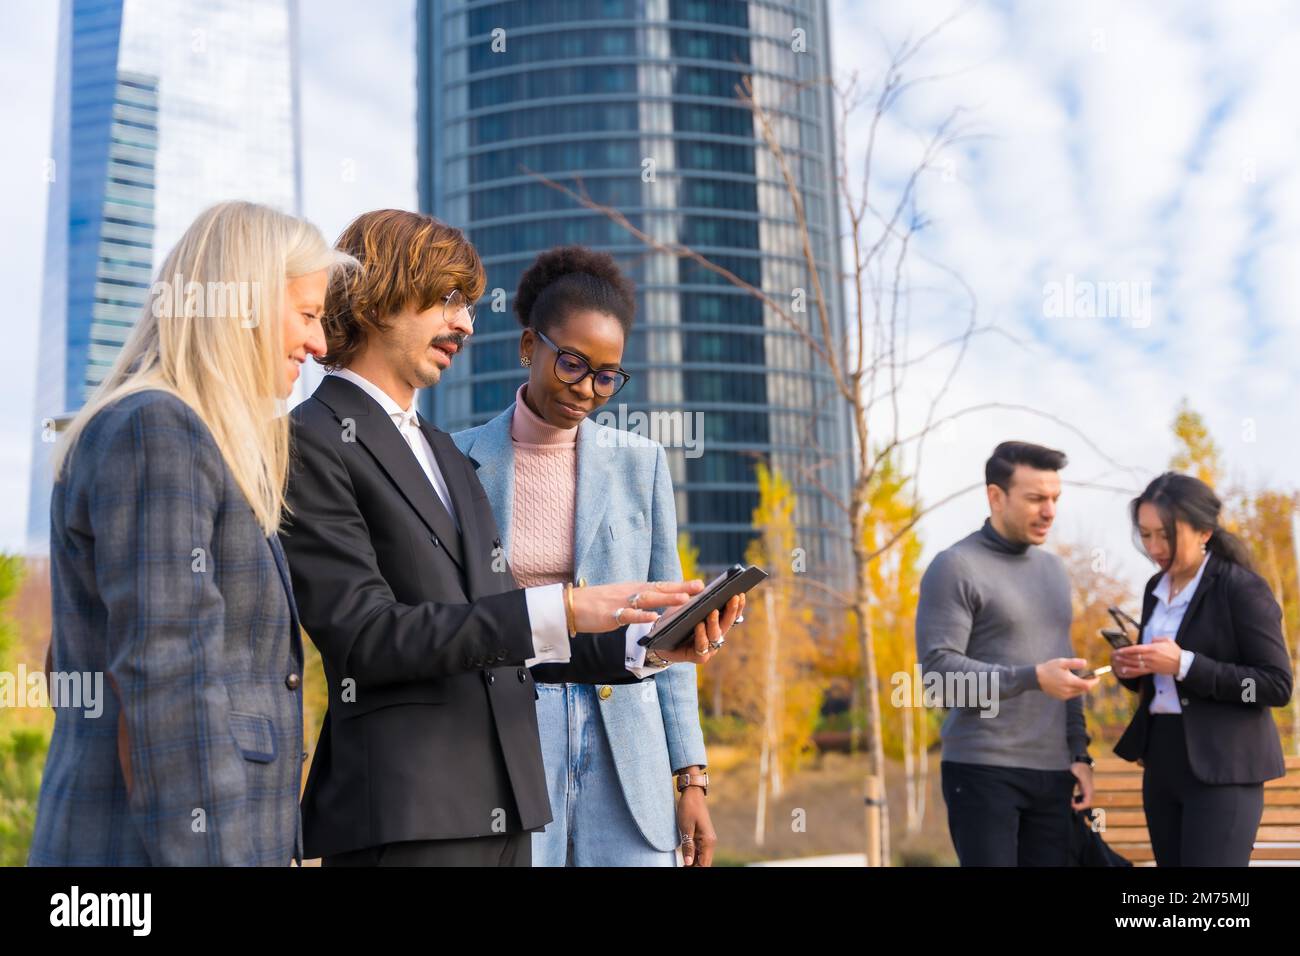 Multi-ethnic business people, business park, coworkers on their work break Stock Photo